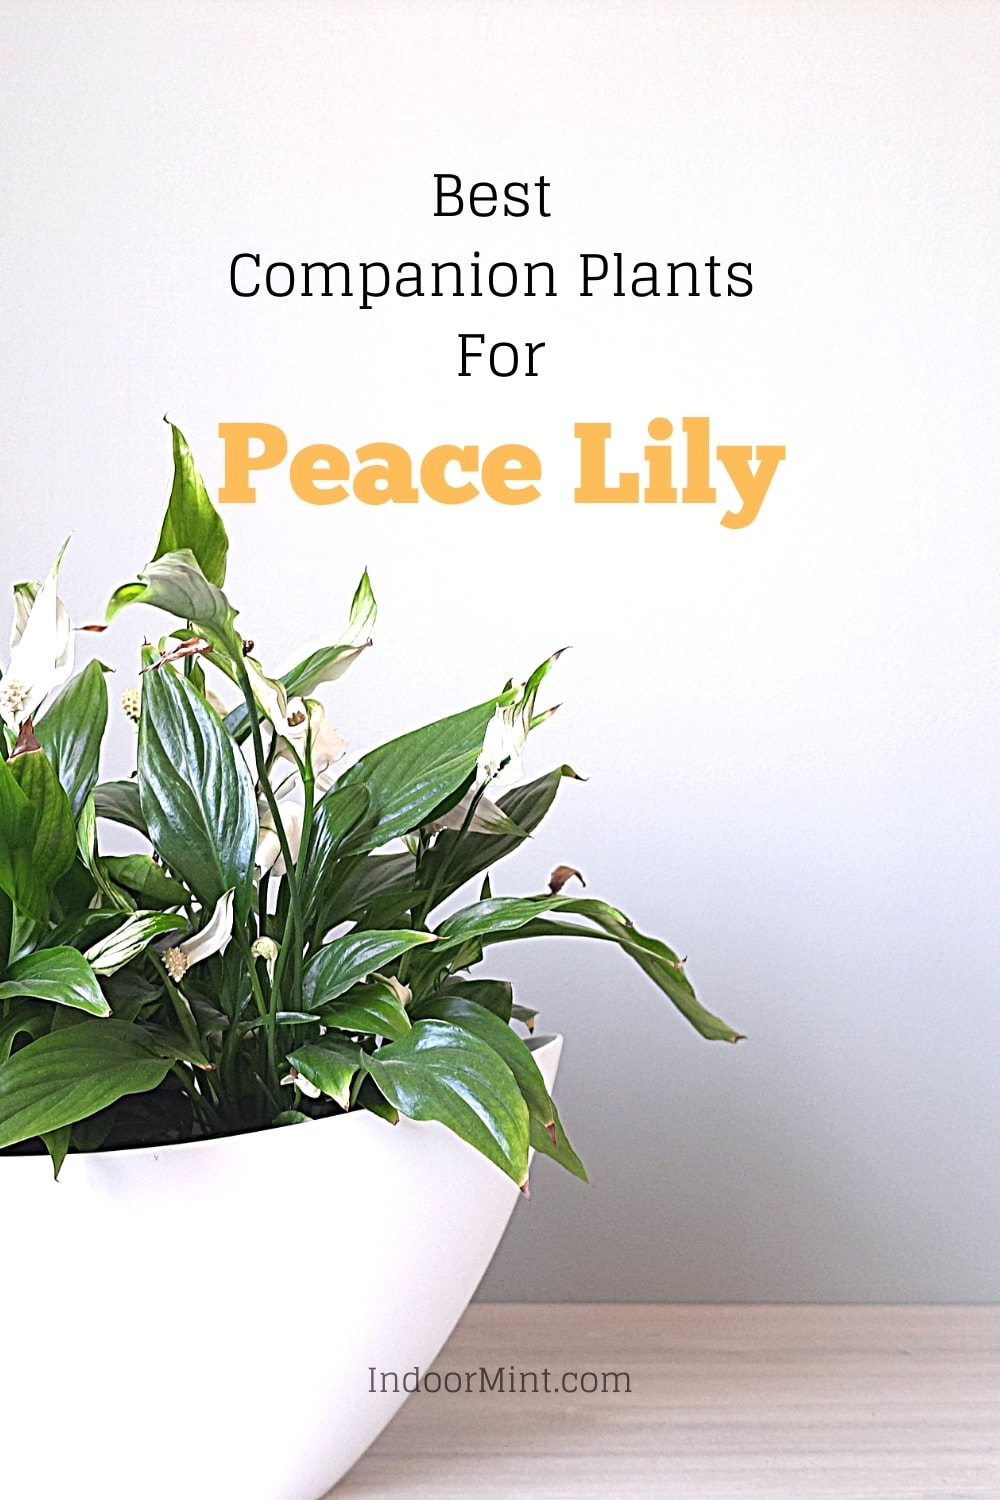 best companion plants for peace lily guide cover image